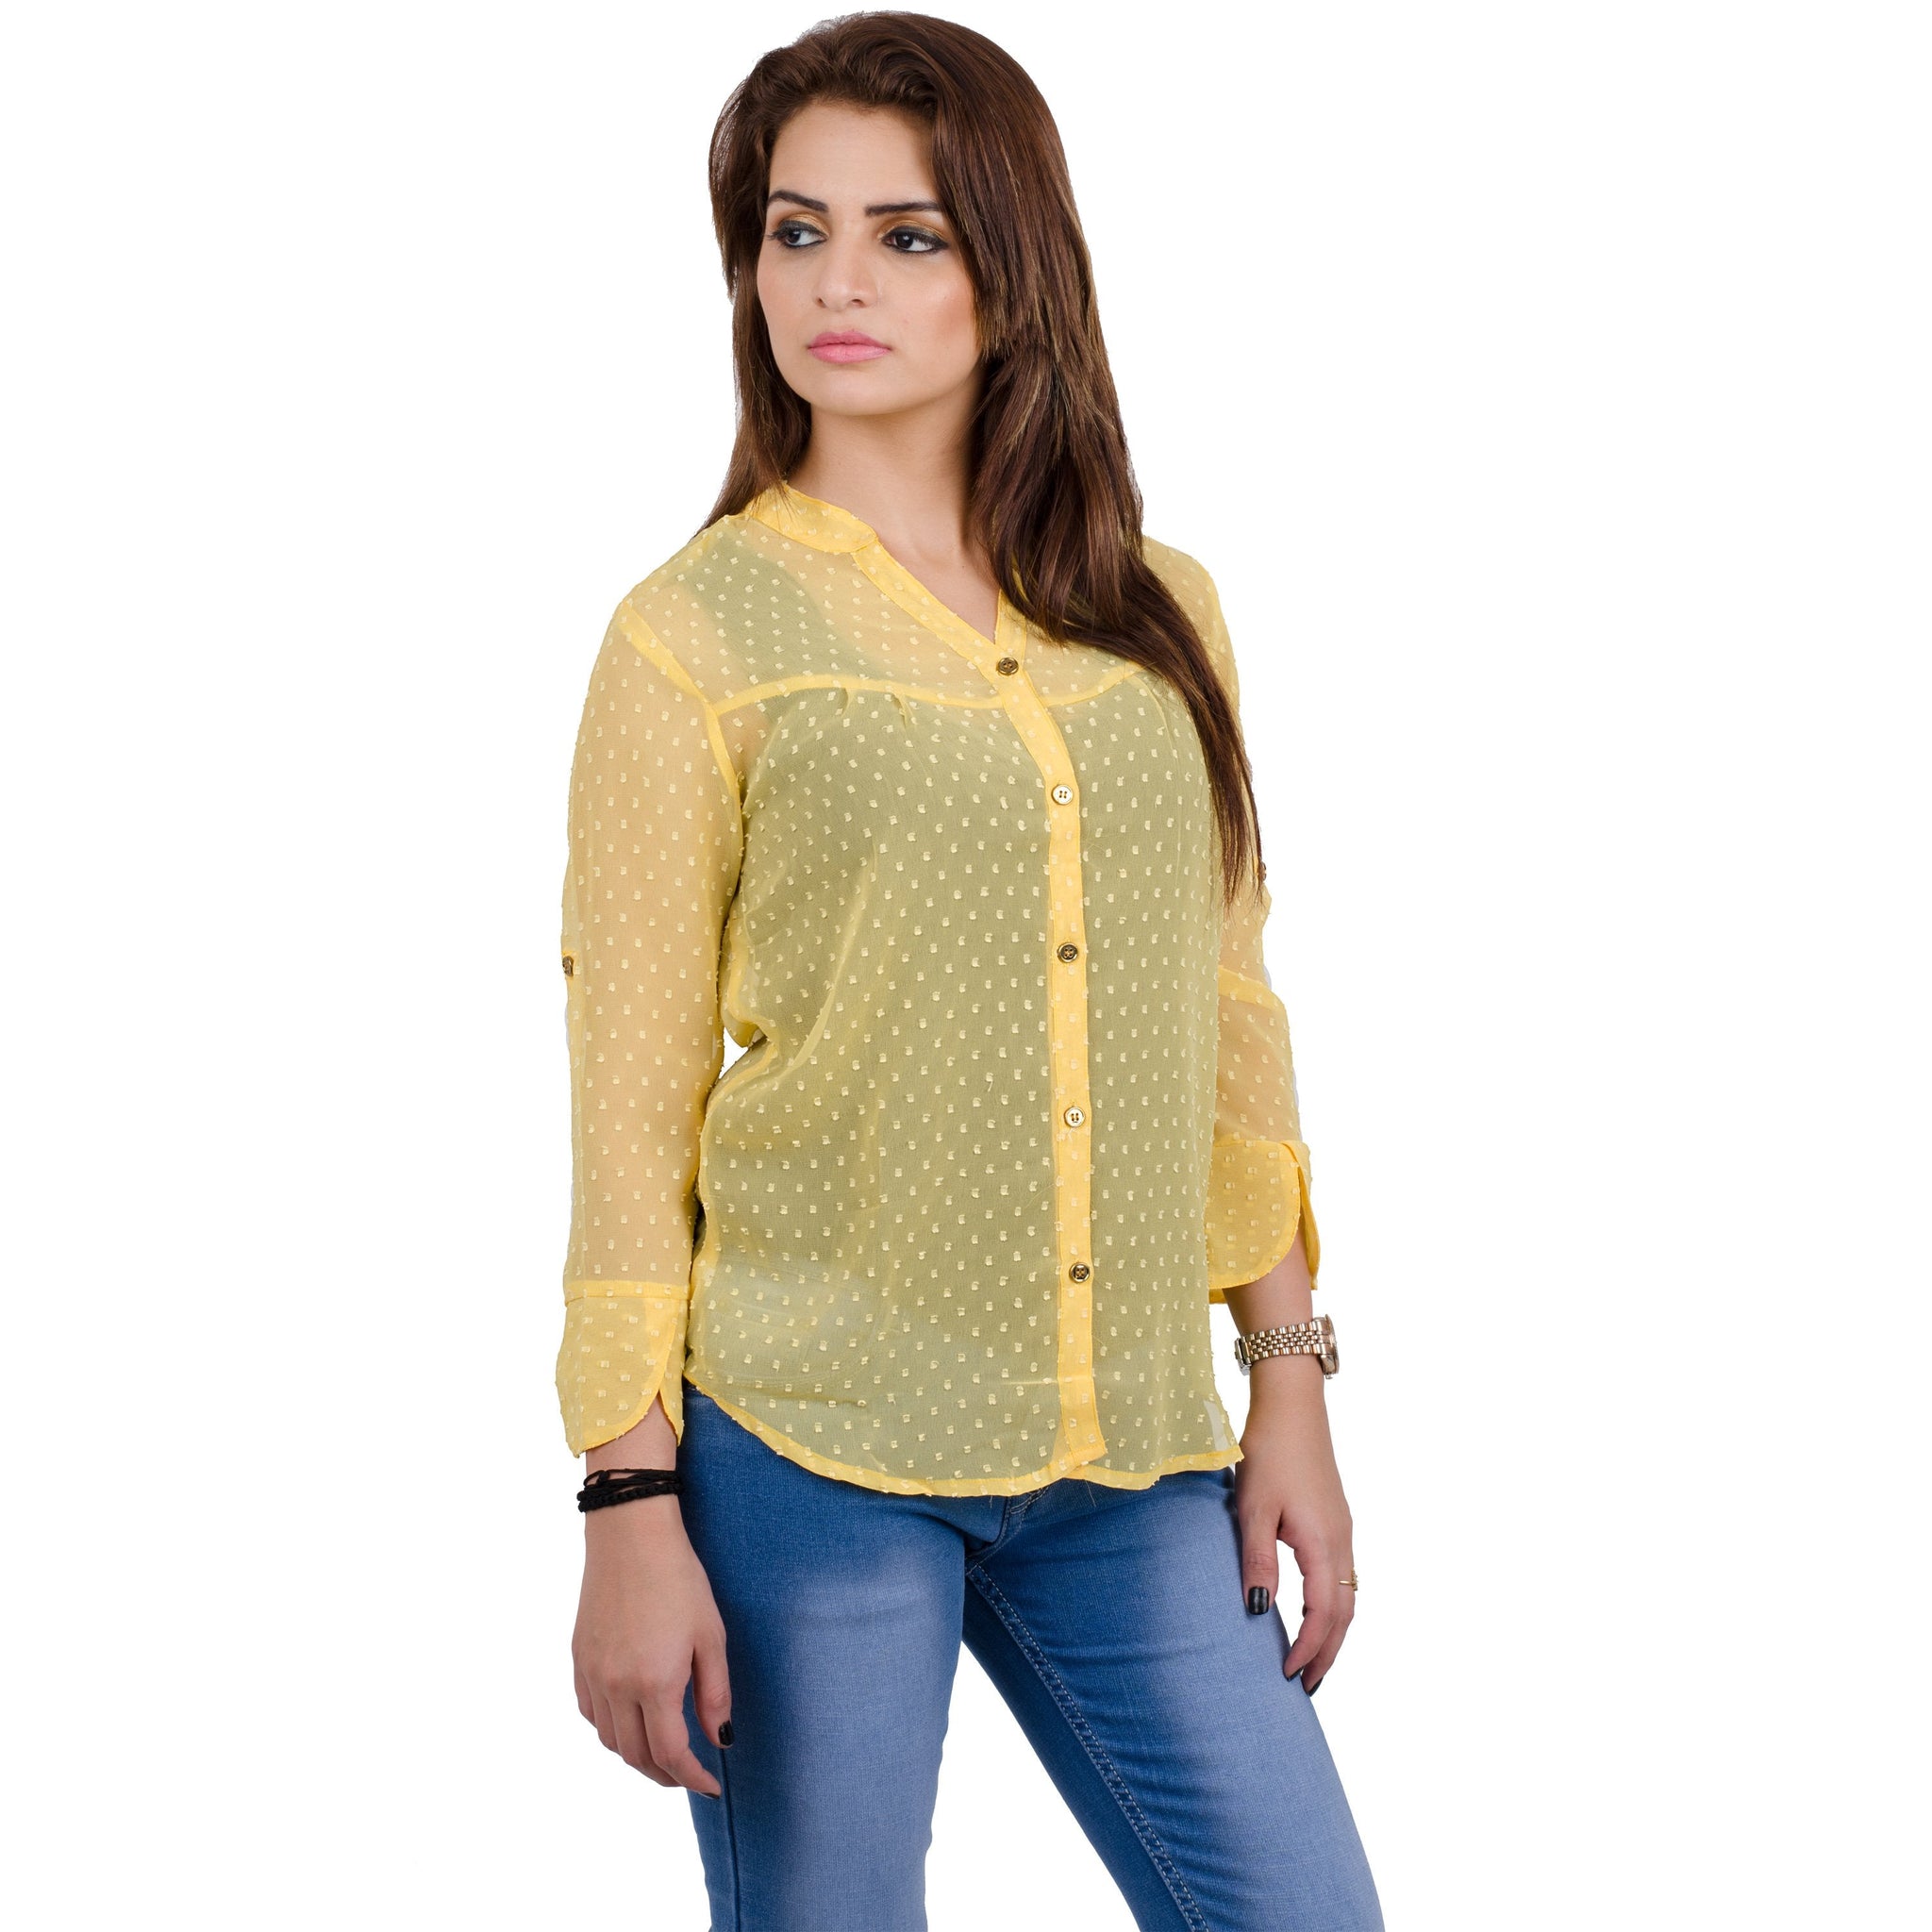 Yellow Georgette Top For Women casual top